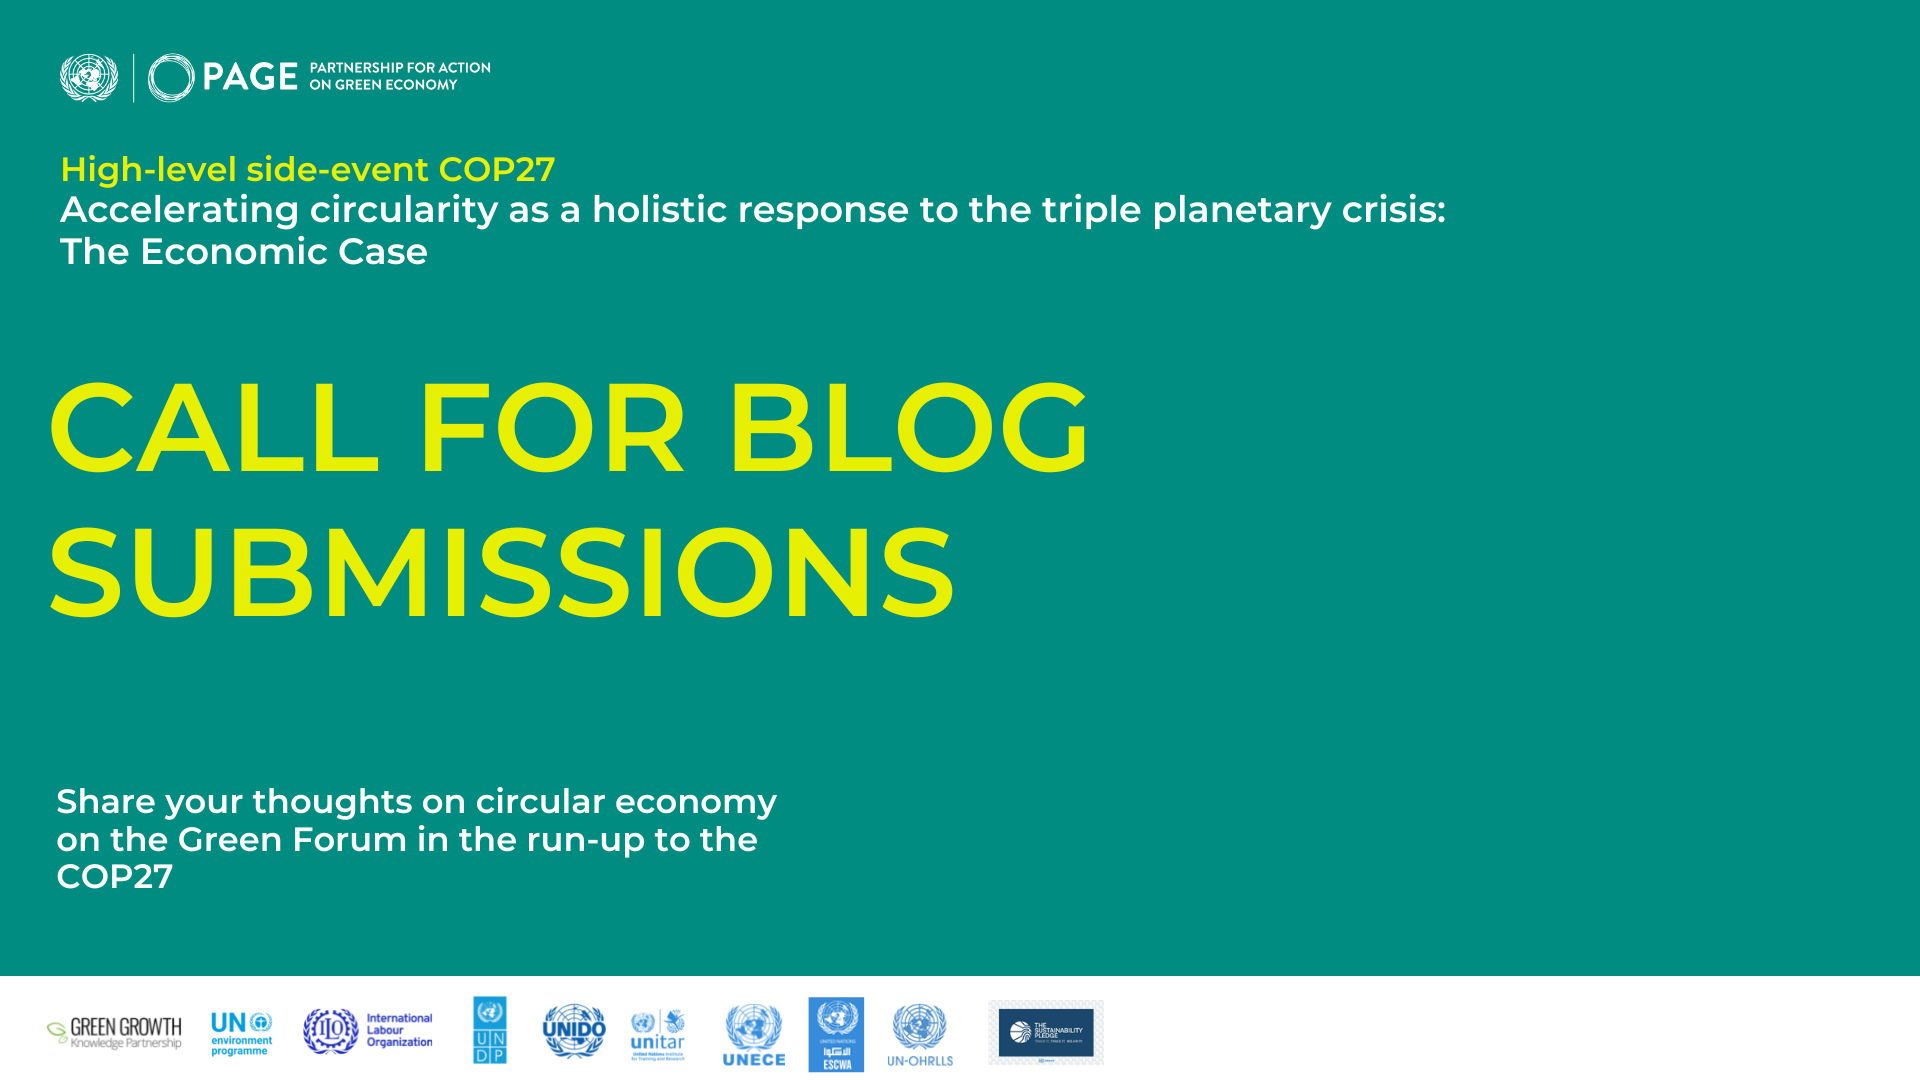 Call for blog submission circular economy